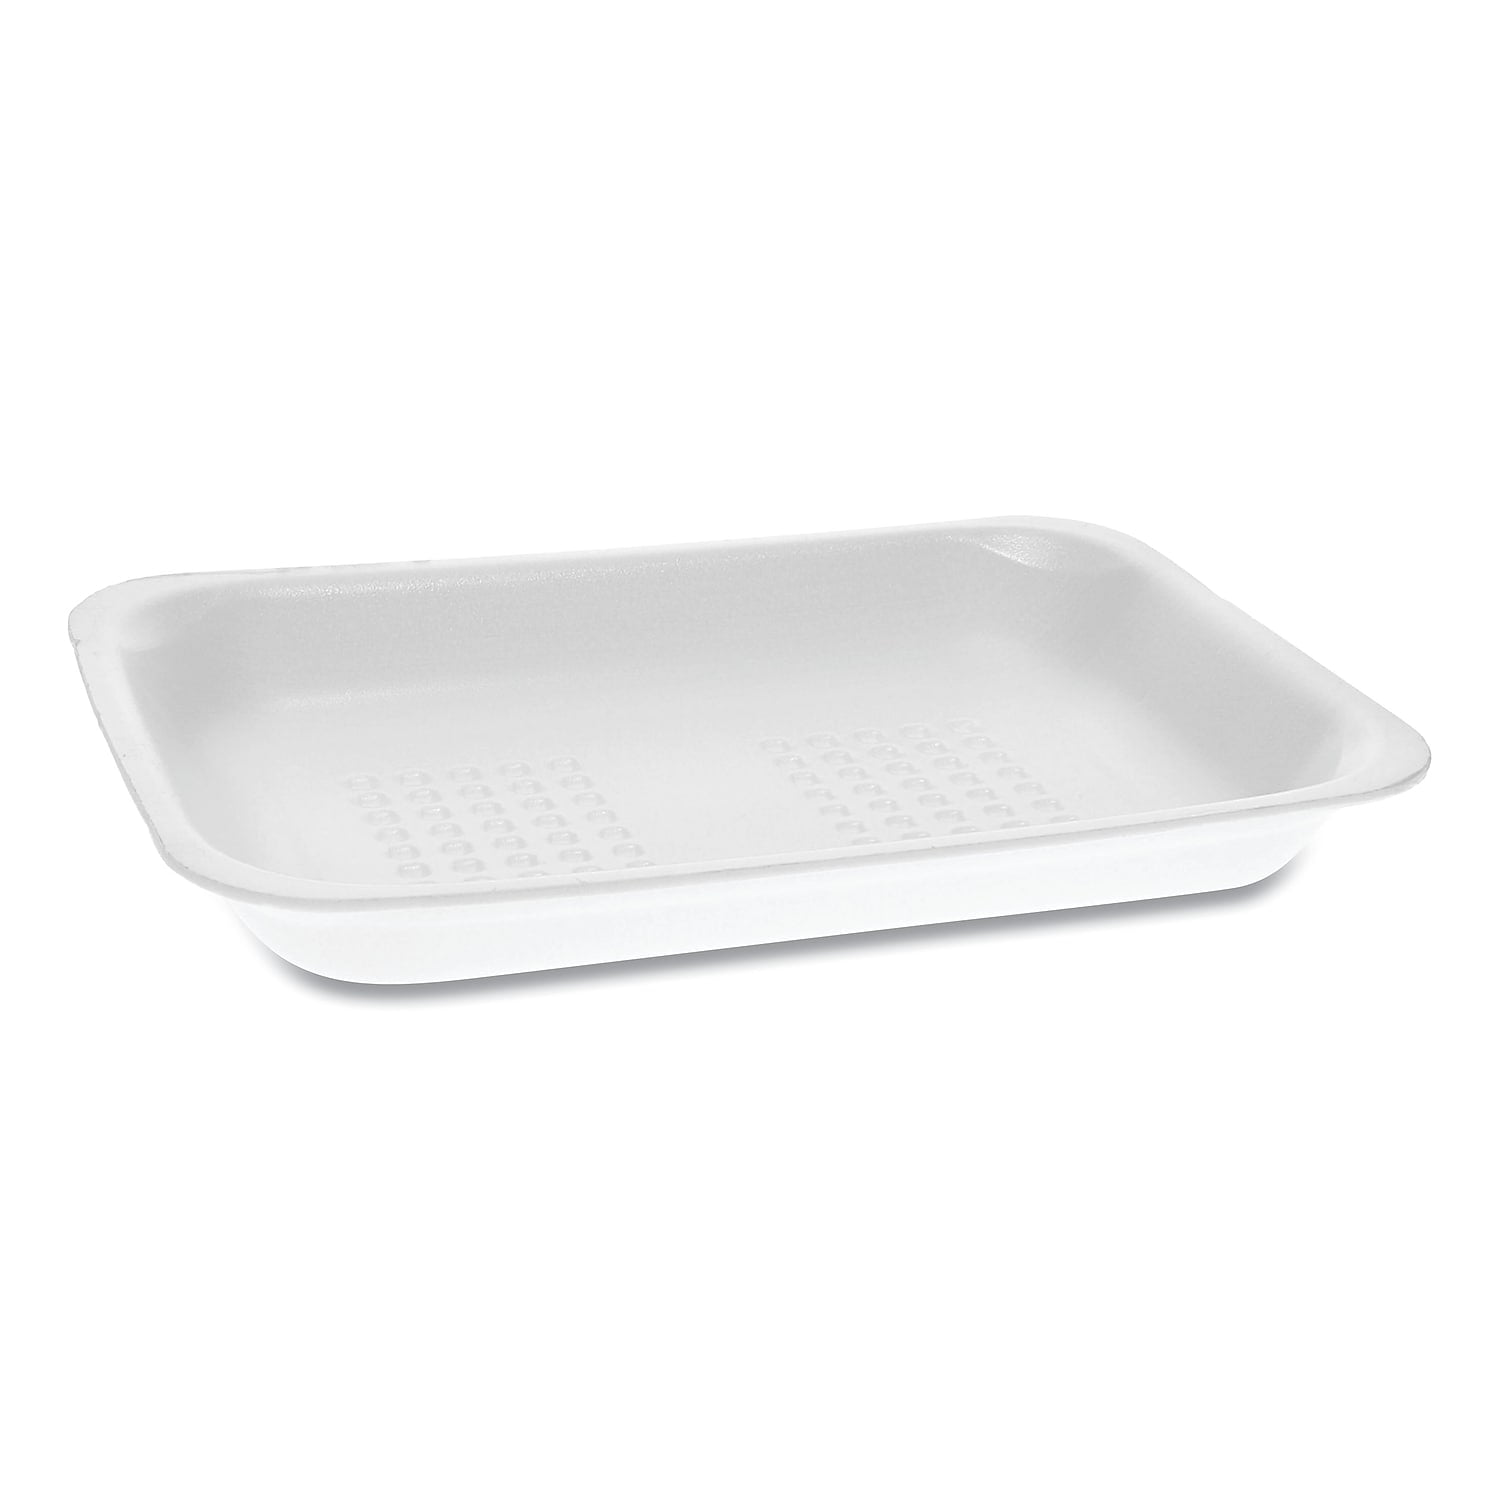 RIKICACA White Foam Meat Tray (25pcs/Pack - 8.3 x 5.9 x 1.2) with White  Meat Absorbent Pad, Disposable Standard Supermarket Food Tray